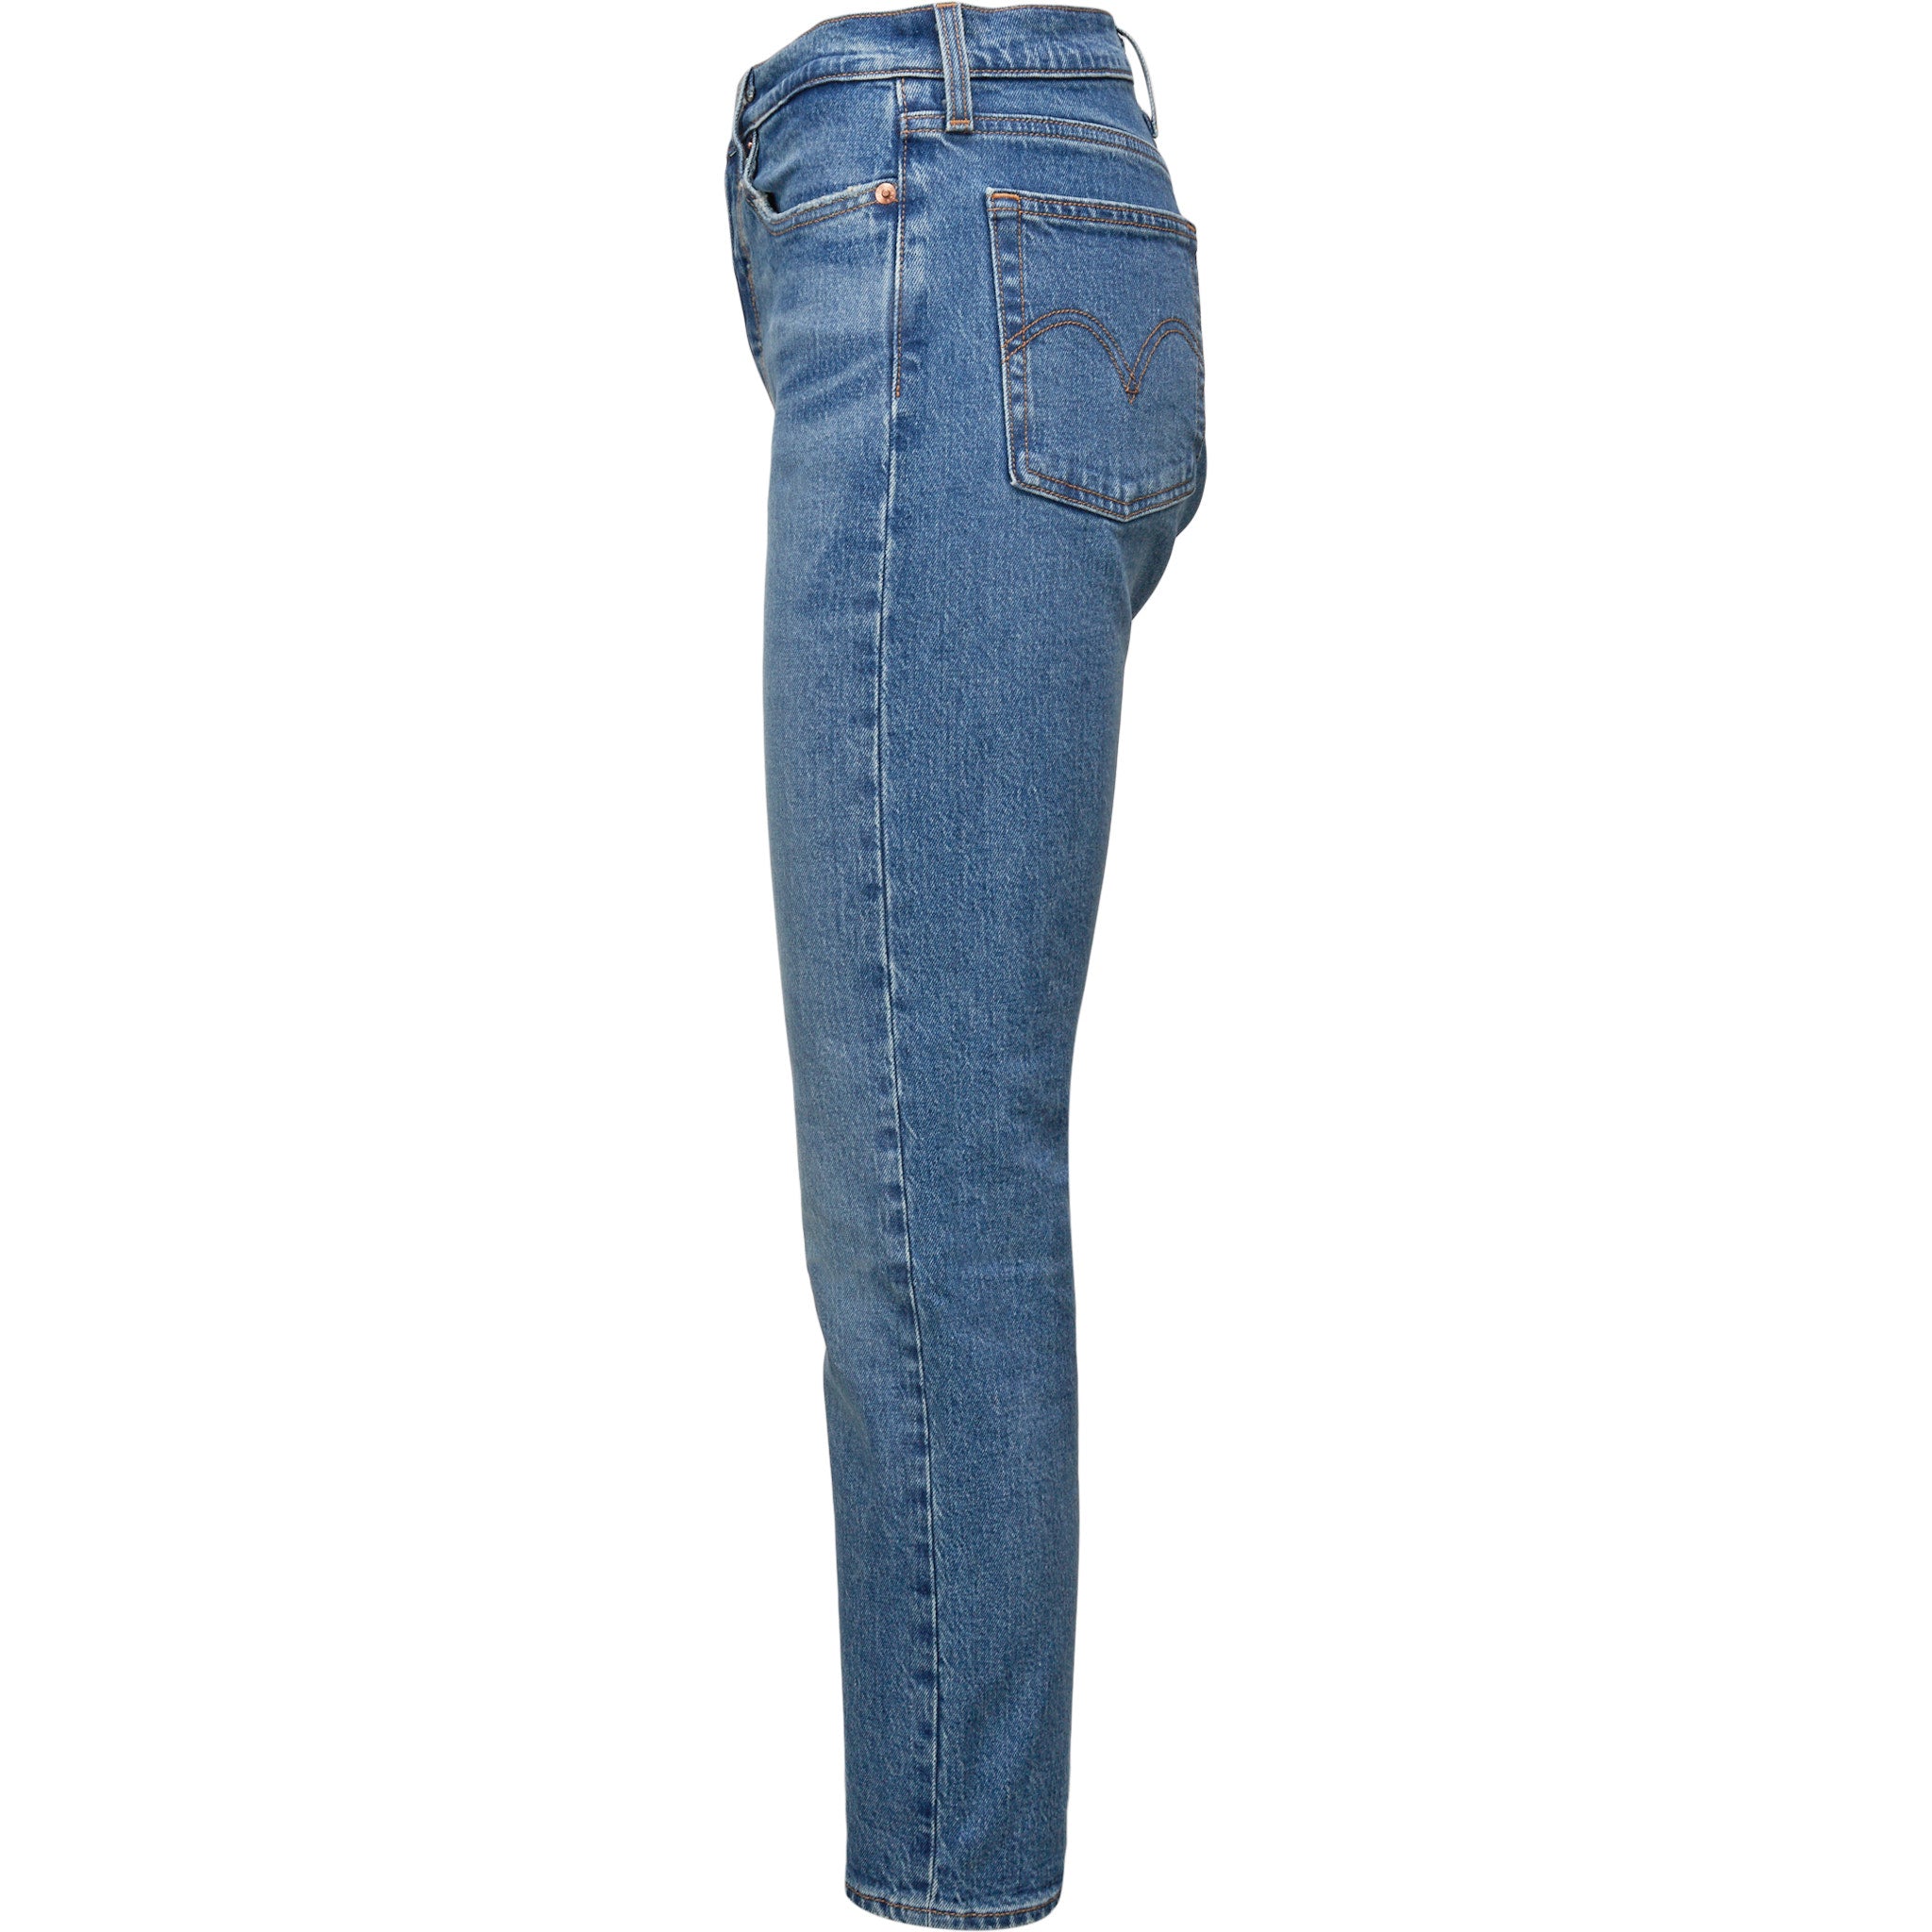 Levi's Wedgie Icon Fit Jeans - Women's | Altitude Sports